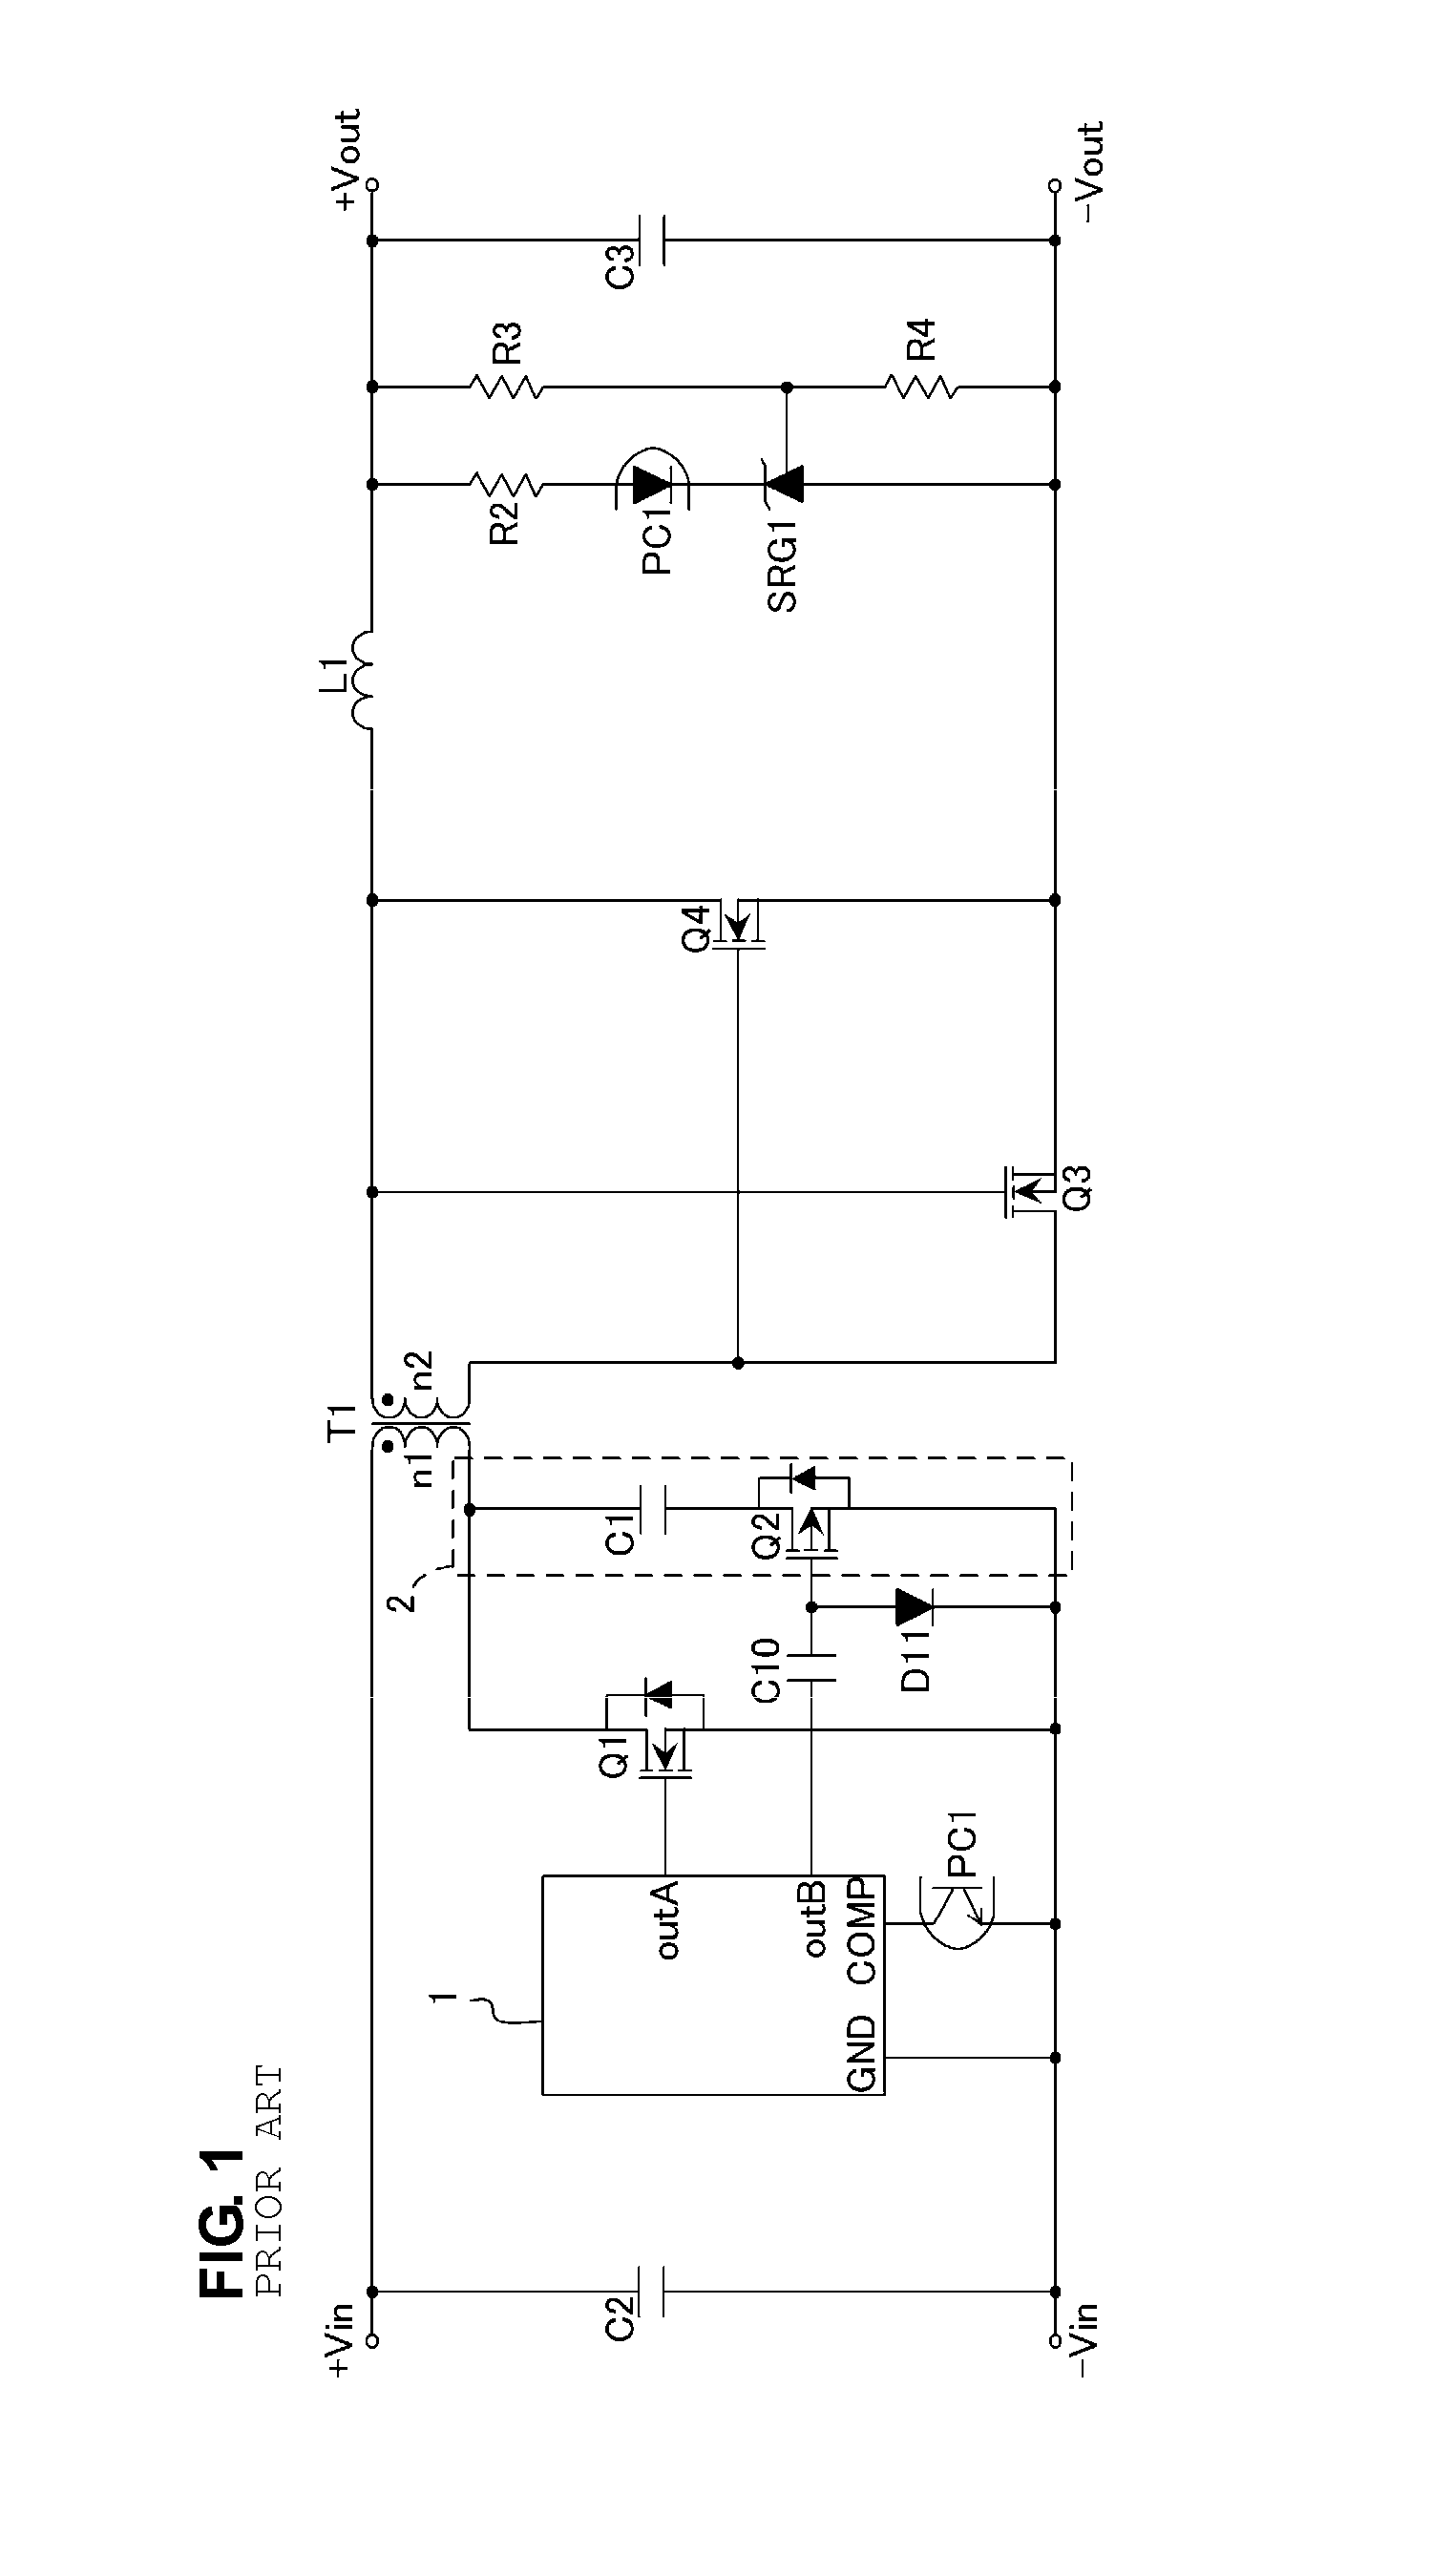 Isolated switching power supply device